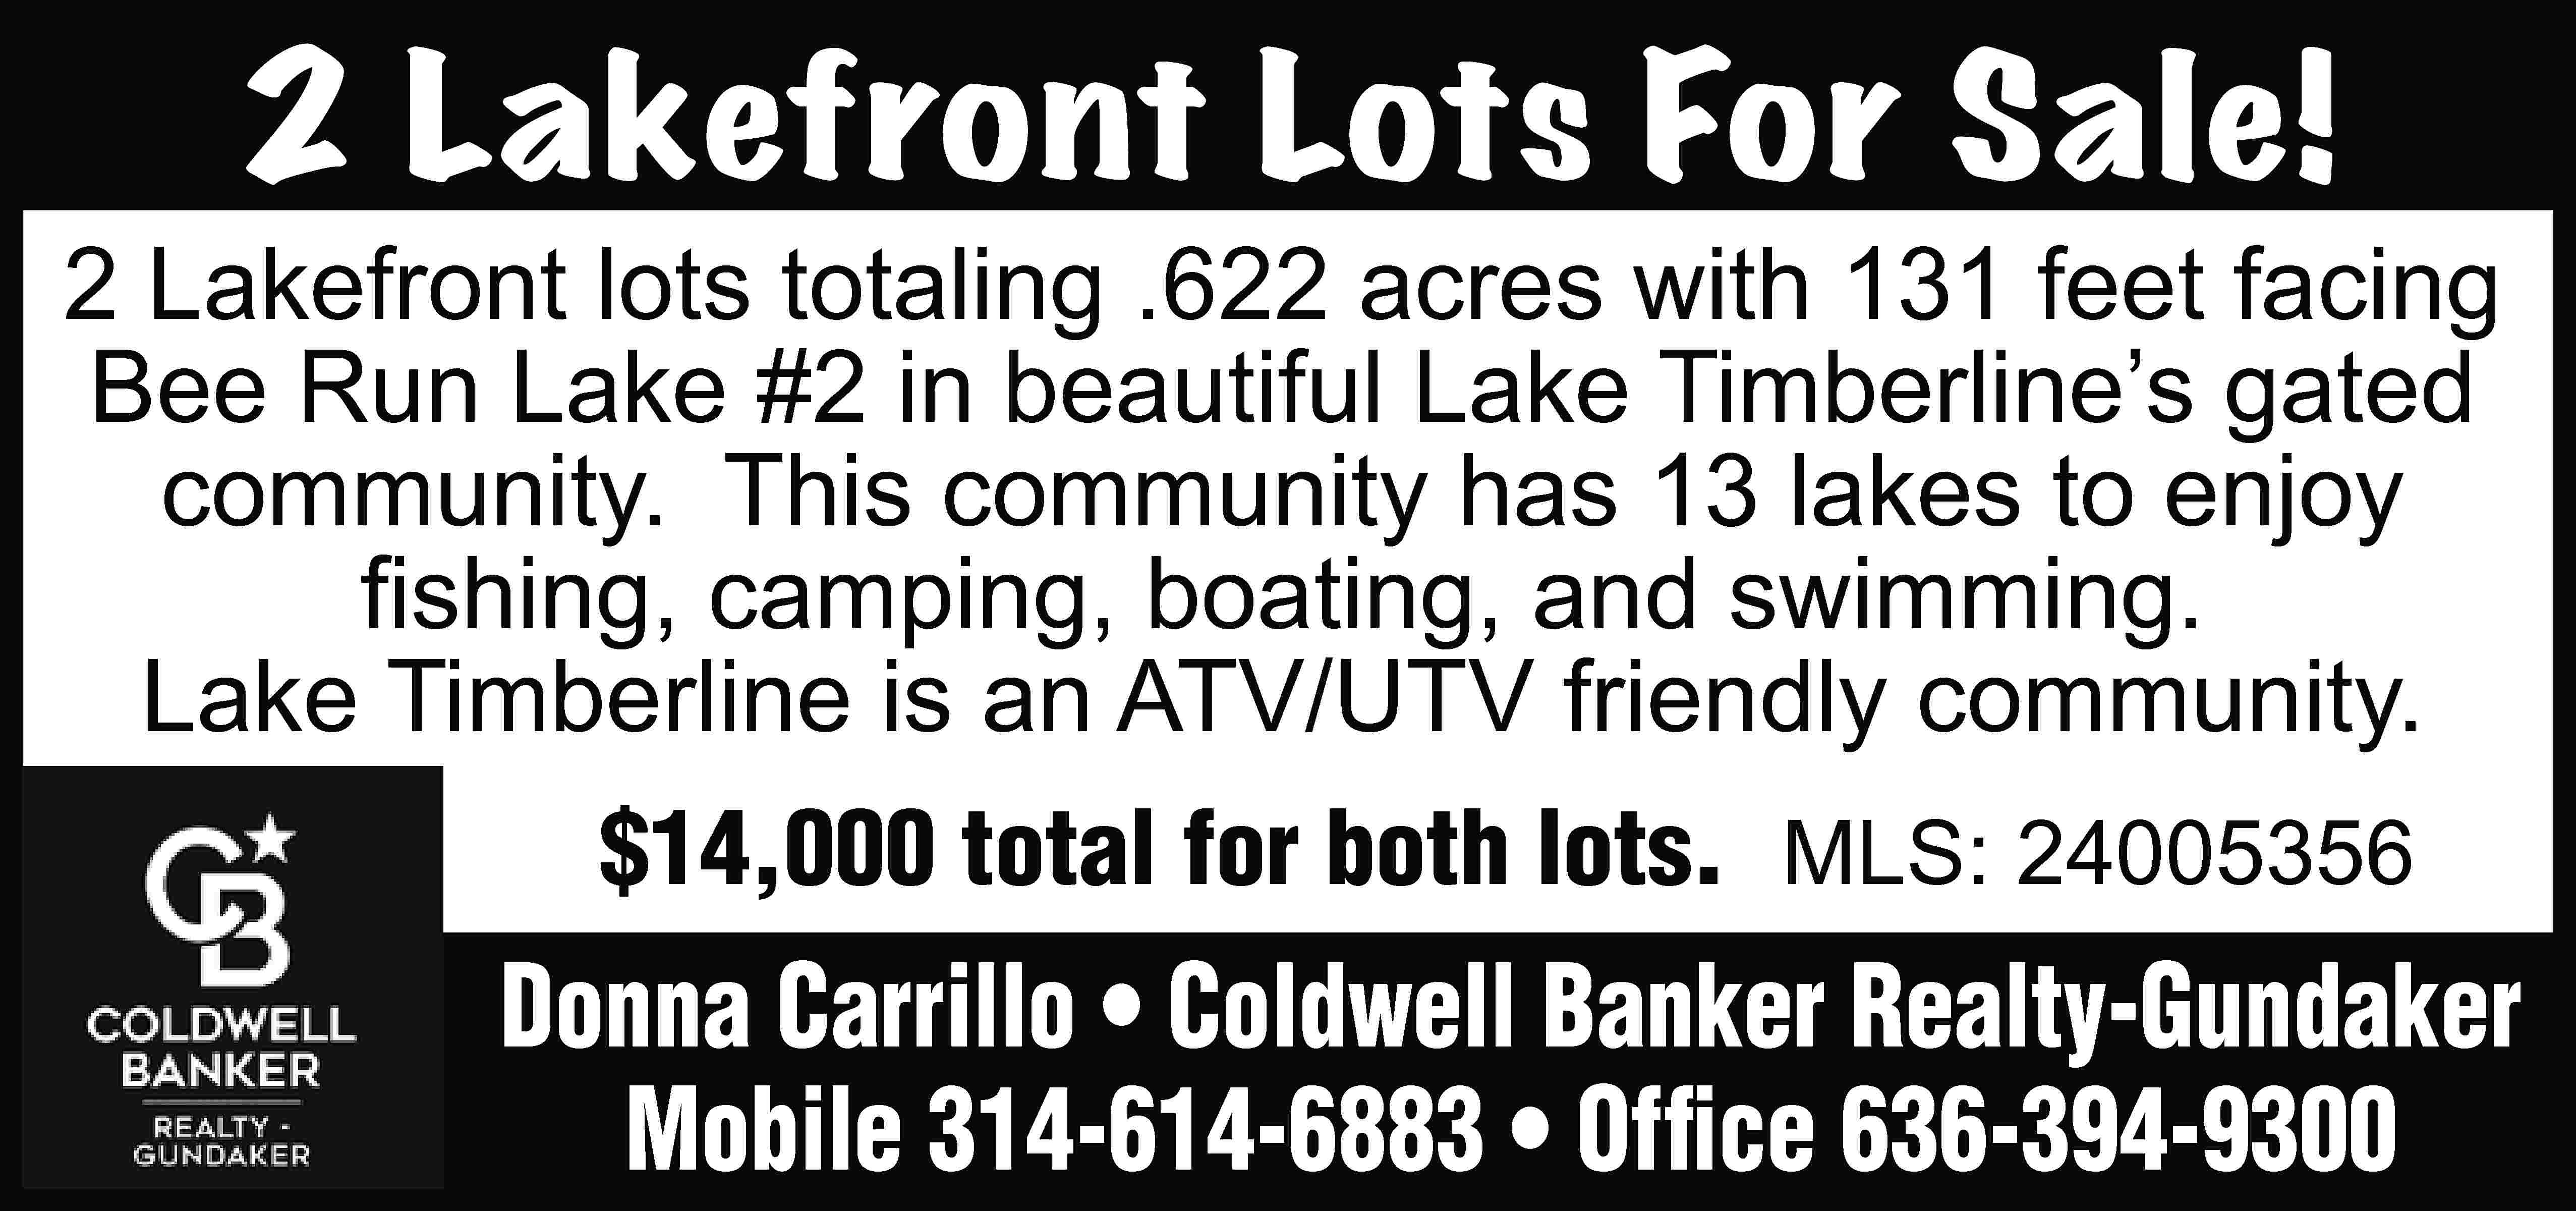 2 Lakefront Lots For Sale!  2 Lakefront Lots For Sale! 2 Lakefront lots totaling .622 acres with 131 feet facing Bee Run Lake #2 in beautiful Lake Timberline’s gated community. This community has 13 lakes to enjoy fishing, camping, boating, and swimming. Lake Timberline is an ATV/UTV friendly community. $14,000 total for both lots. MLS: 24005356 Donna Carrillo • Coldwell Banker Realty-Gundaker Mobile 314-614-6883 • Office 636-394-9300